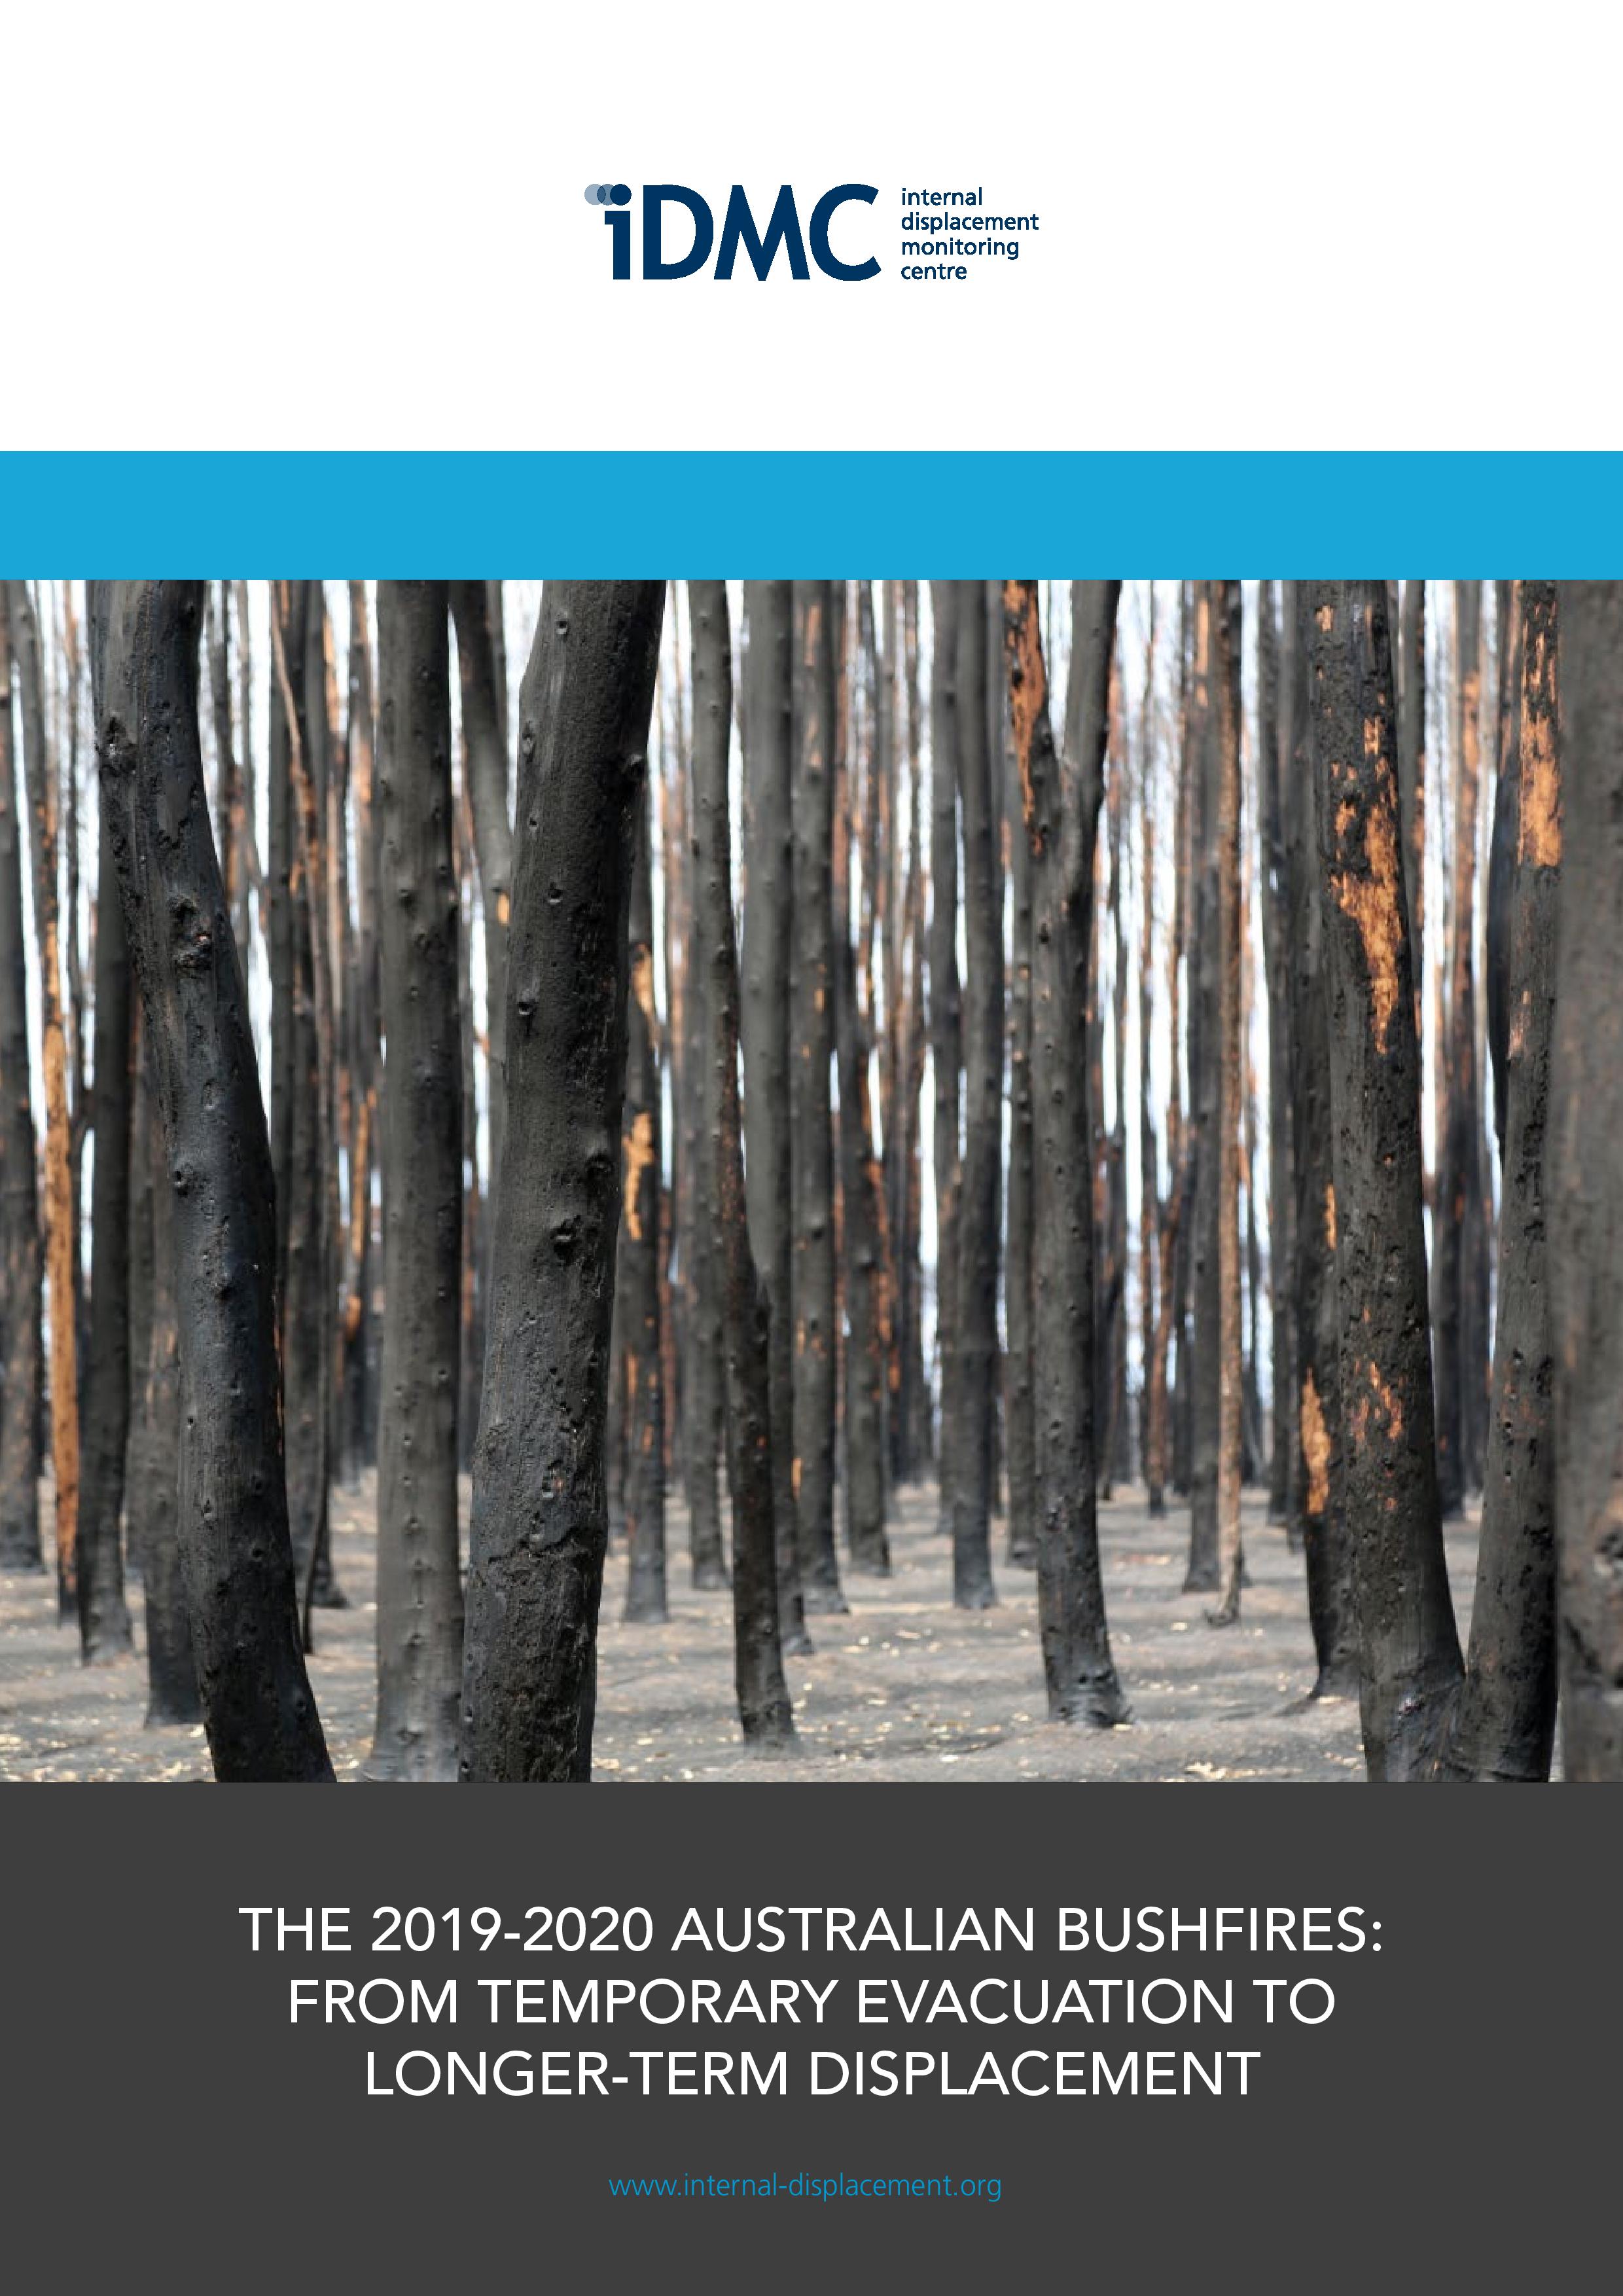 The 2019-2020 Australian bushfires: from temporary evacuation to longer-term displacement